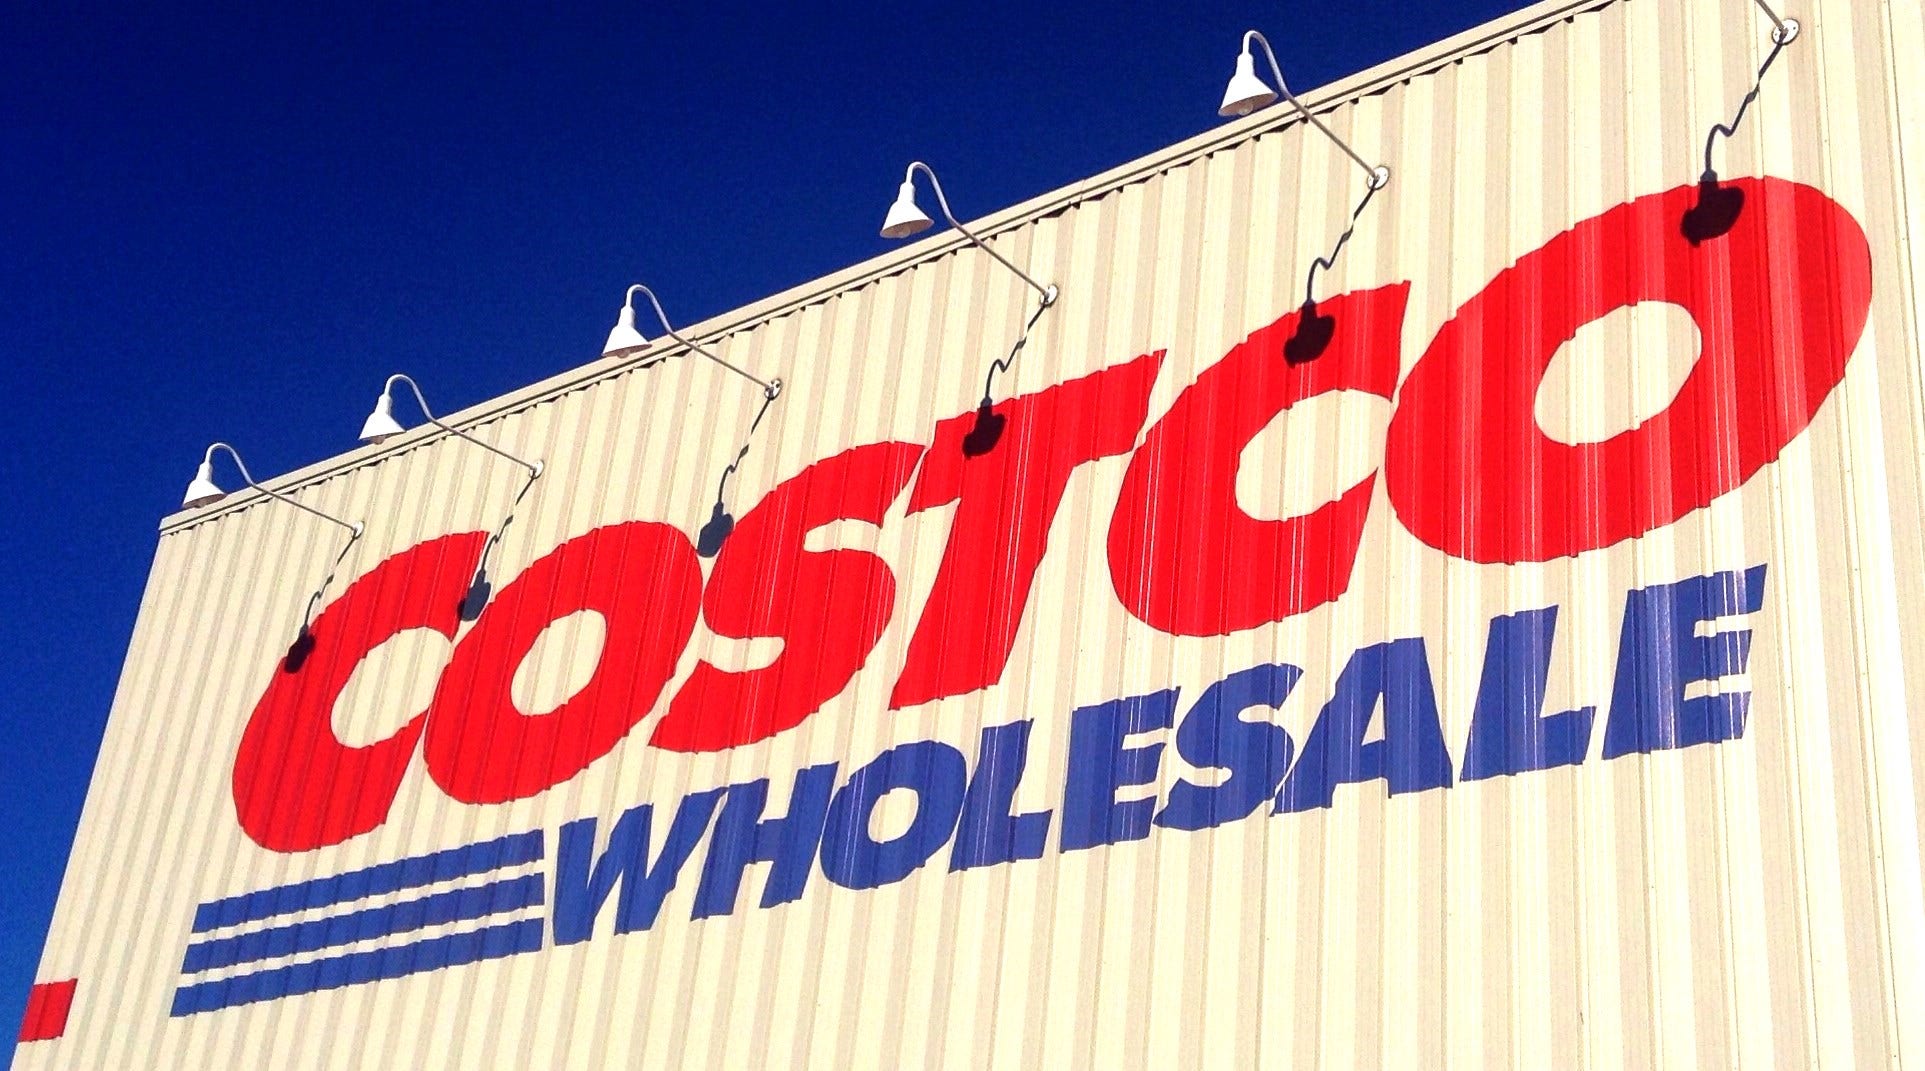 What's Going On With Costco Stock Today?